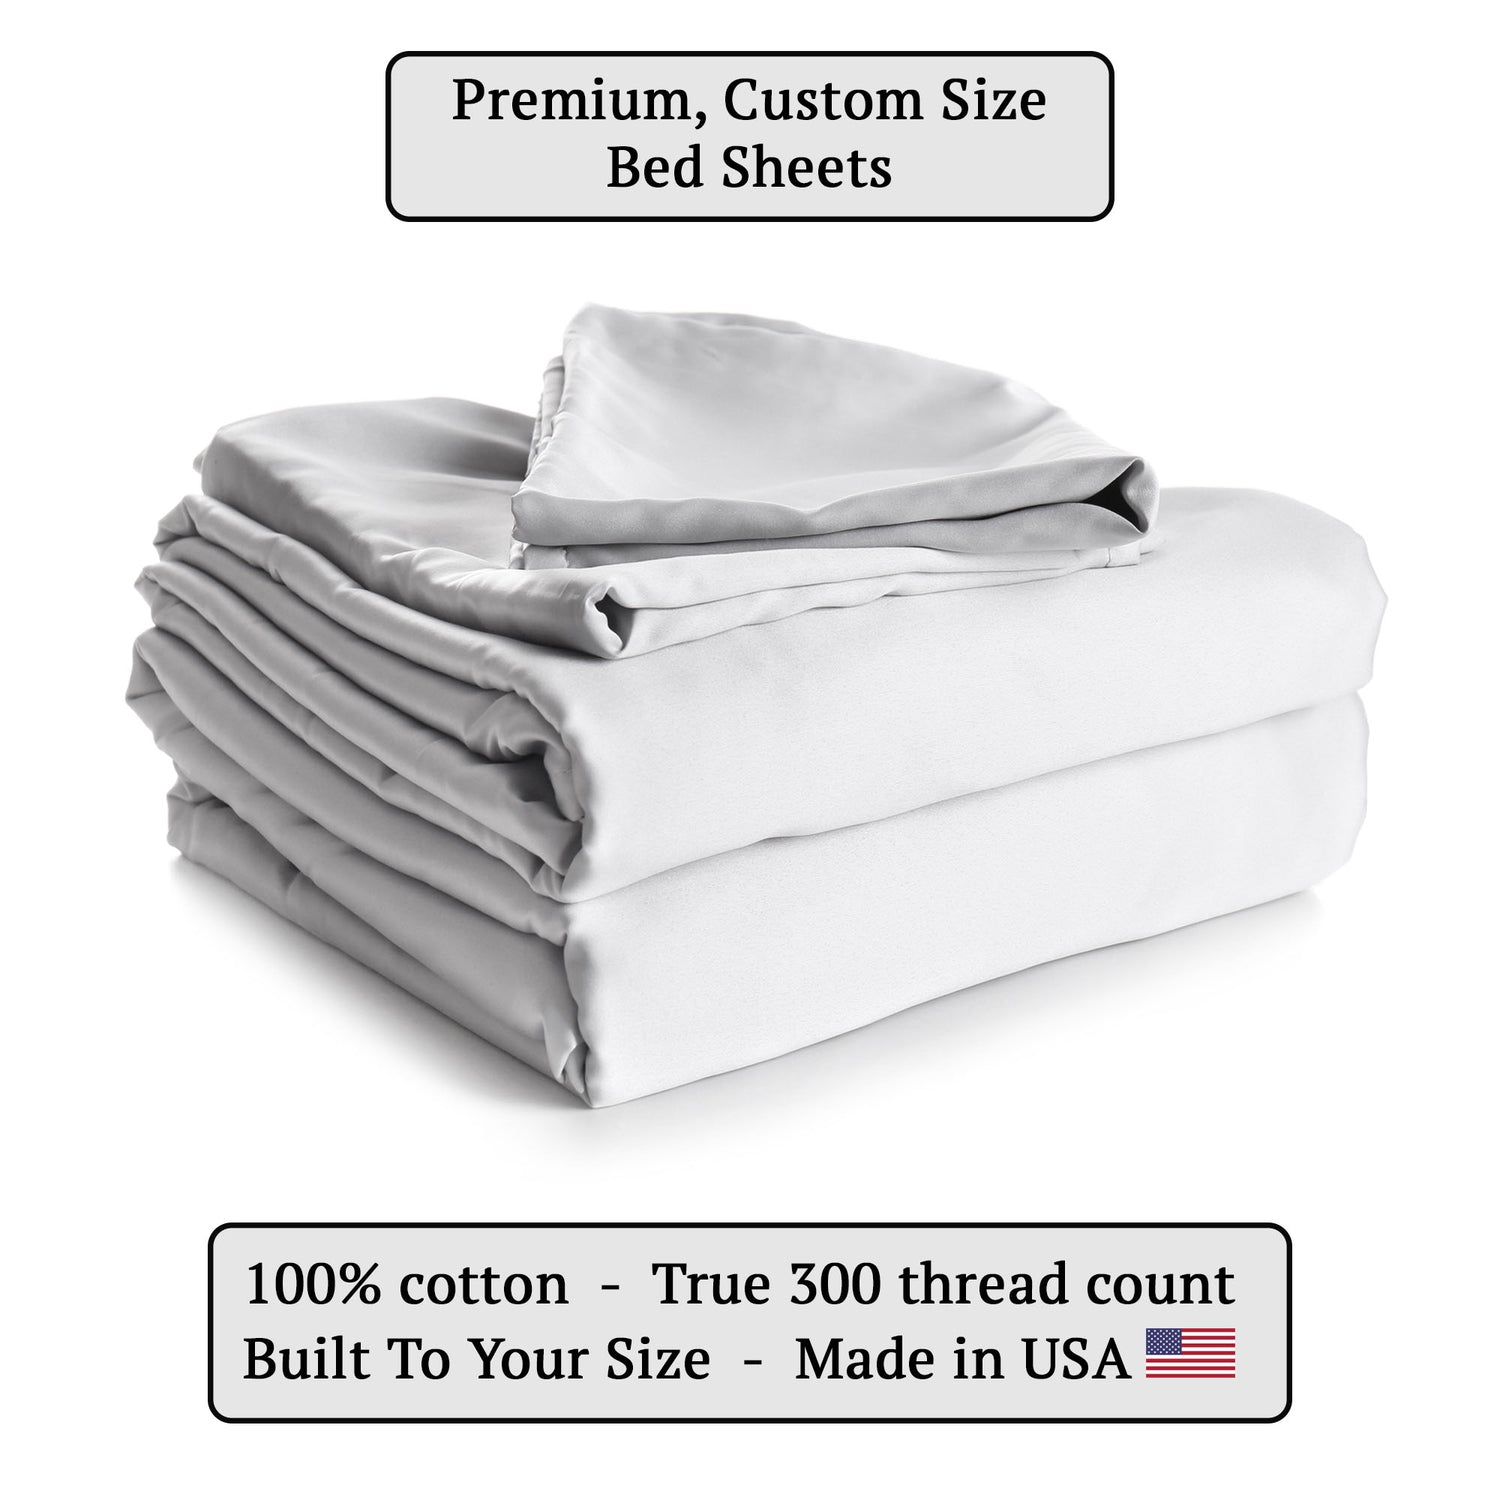 Custom Size Bed Sheets